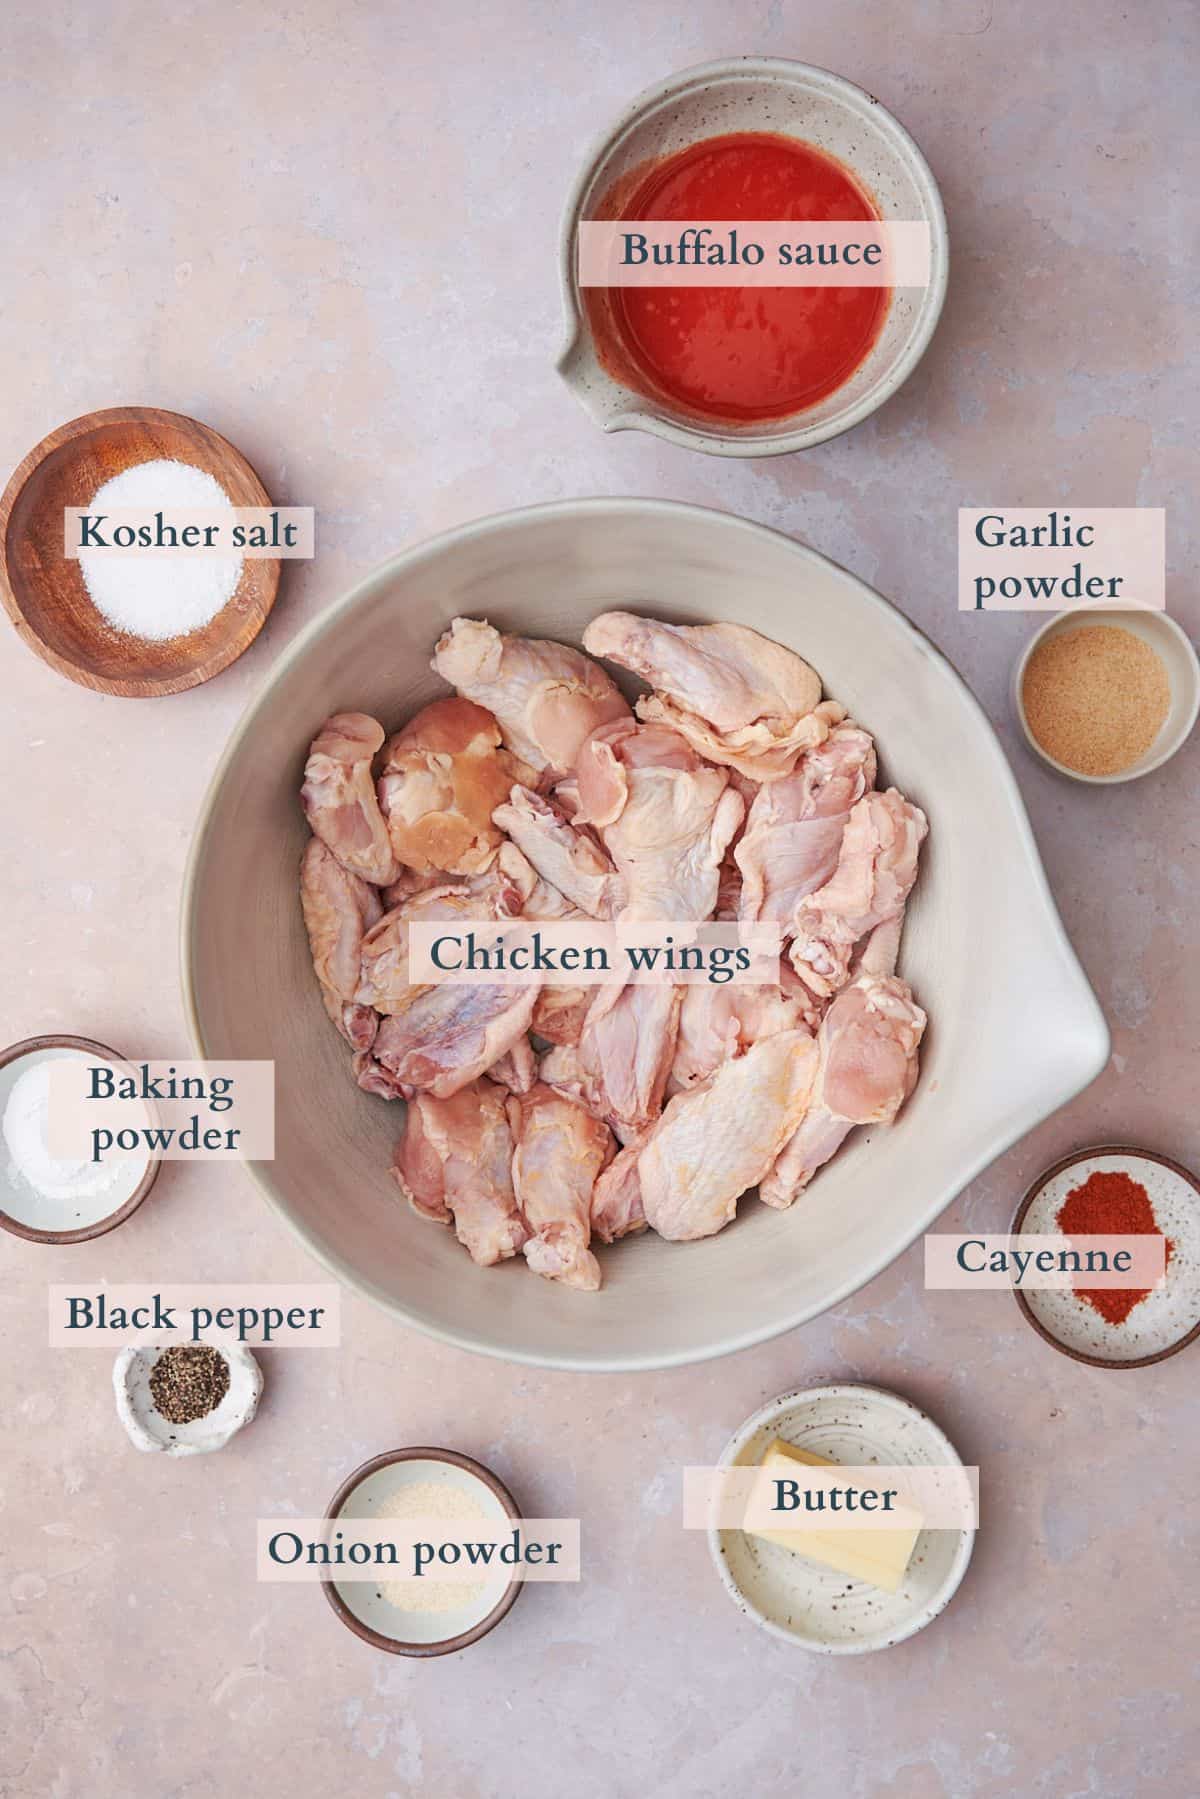 Ingredients to make baked buffalo wings on a warm backdrop.